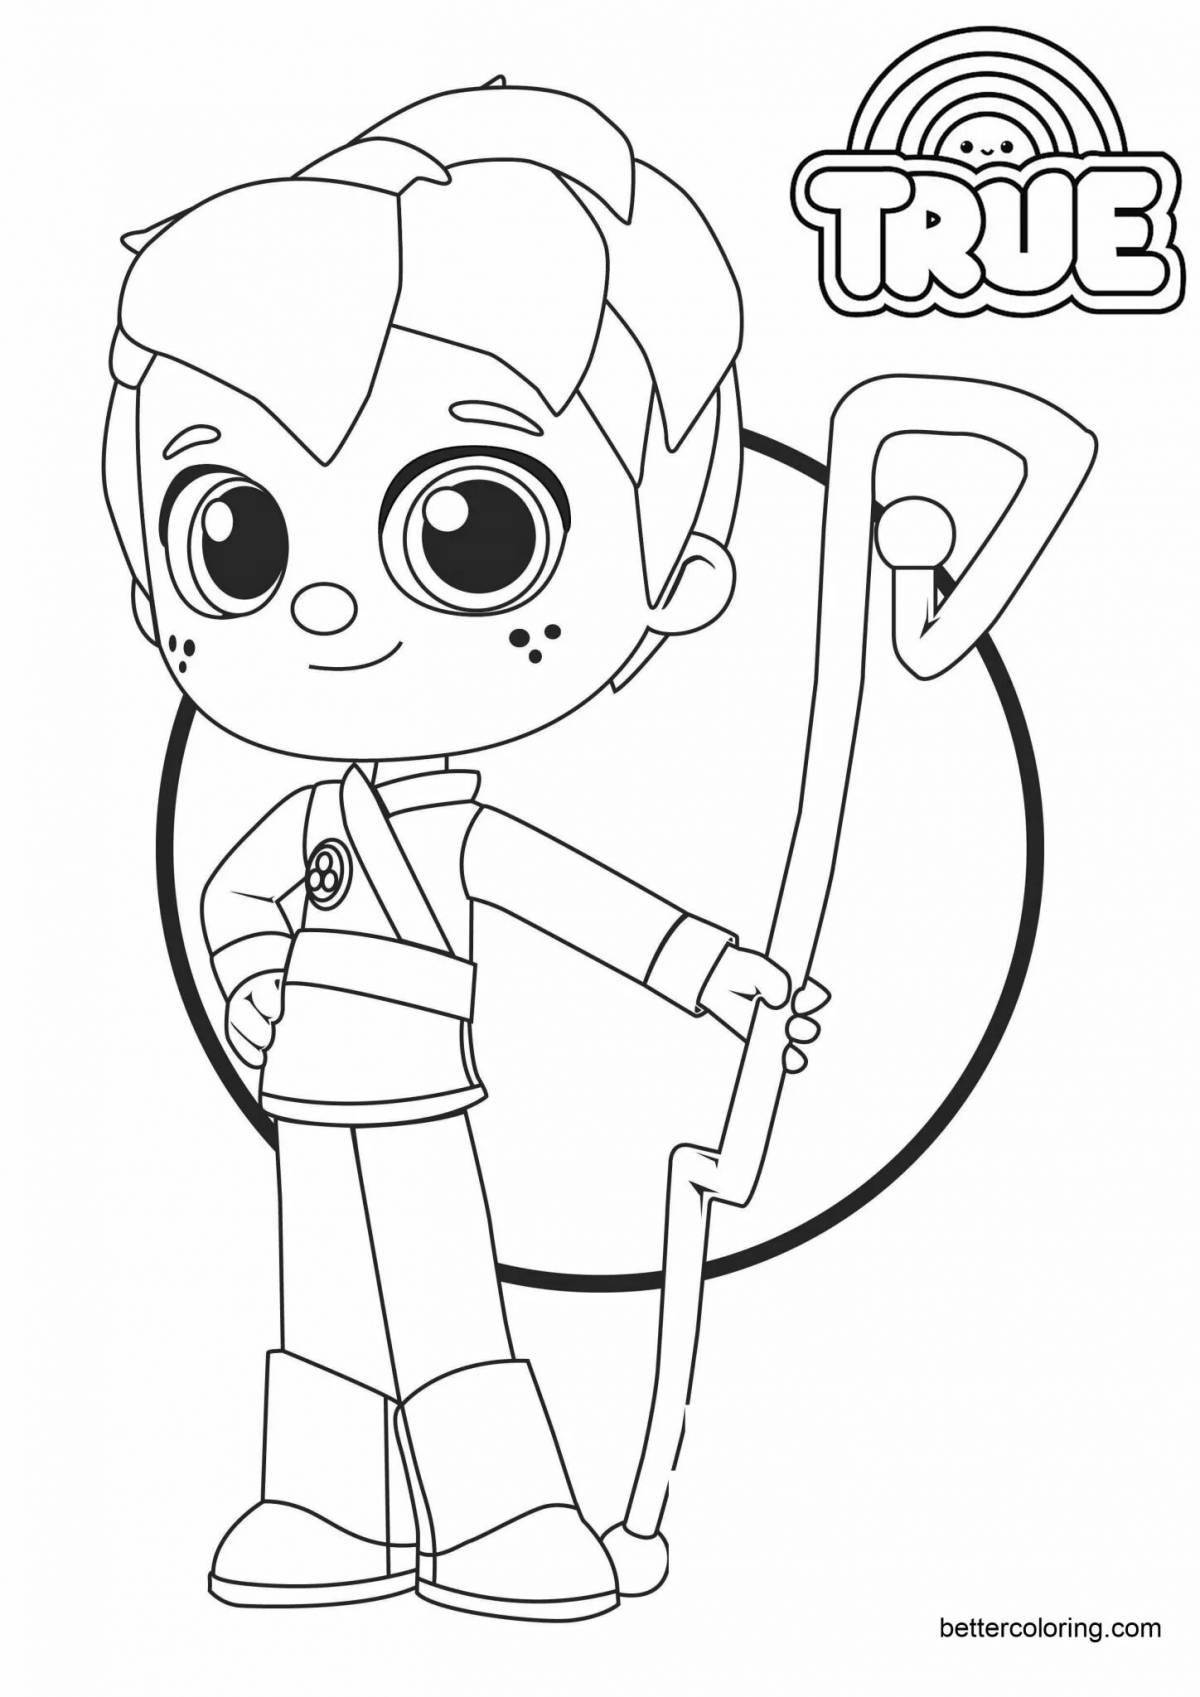 Colourful rainbow kingdom coloring page